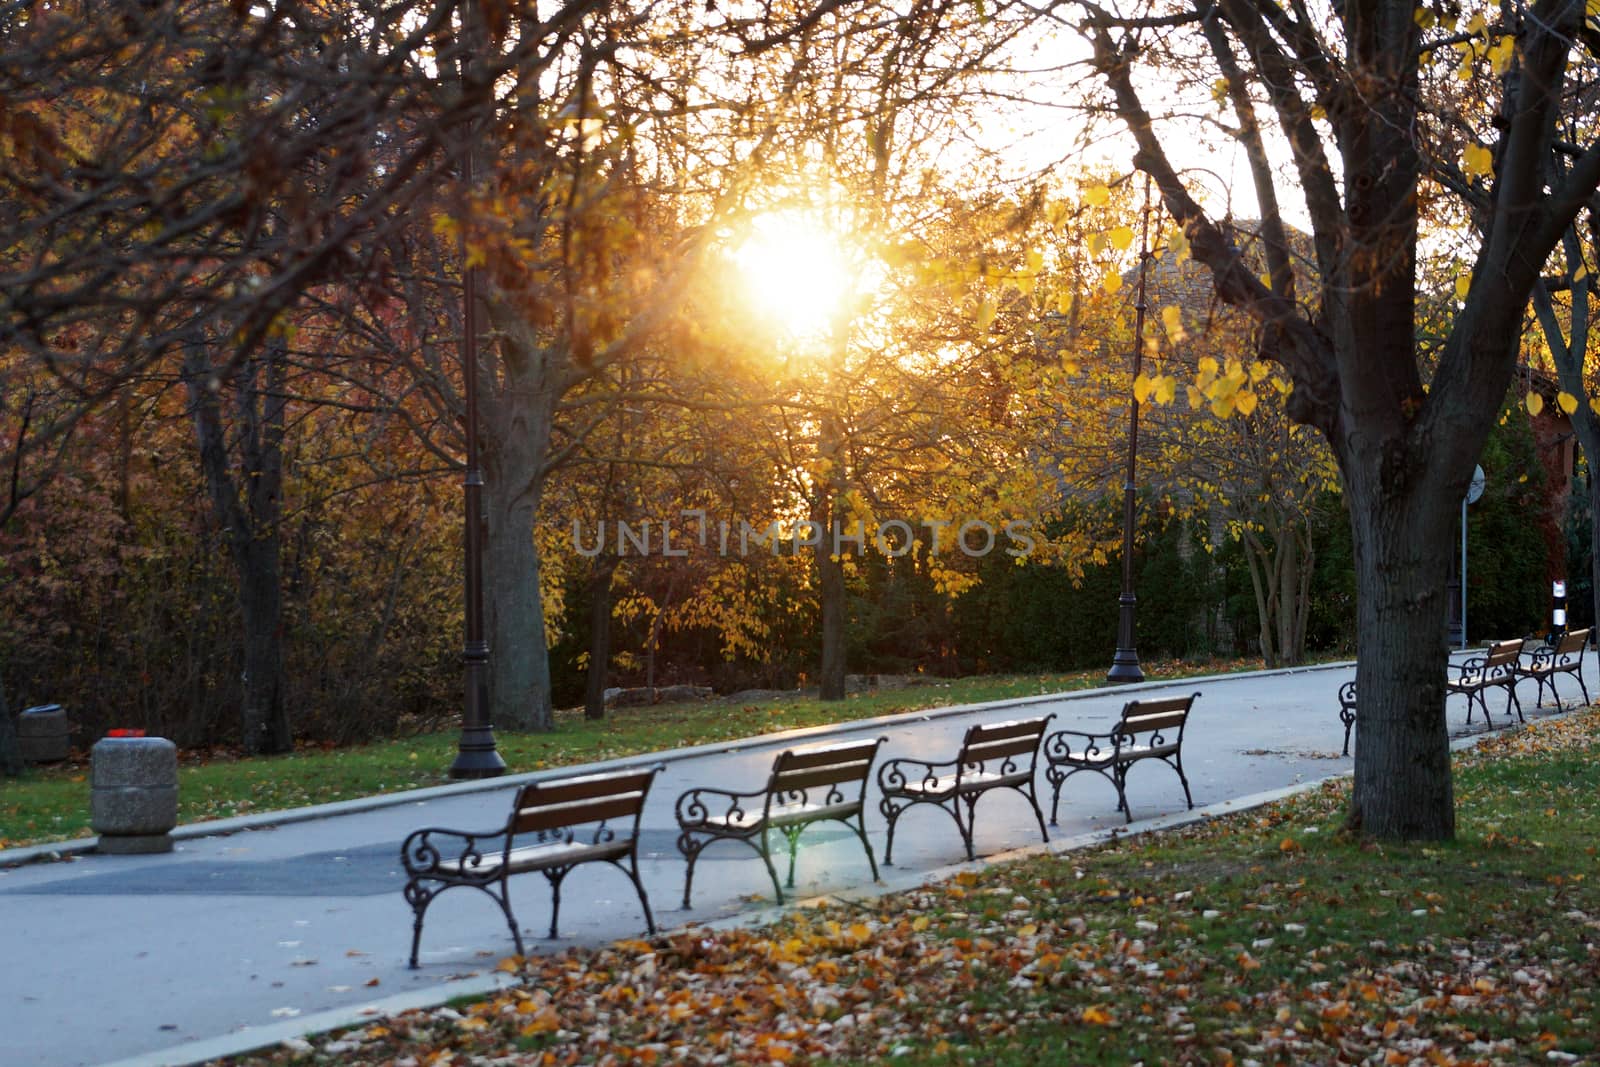 sunset in autumn park with empty benches.